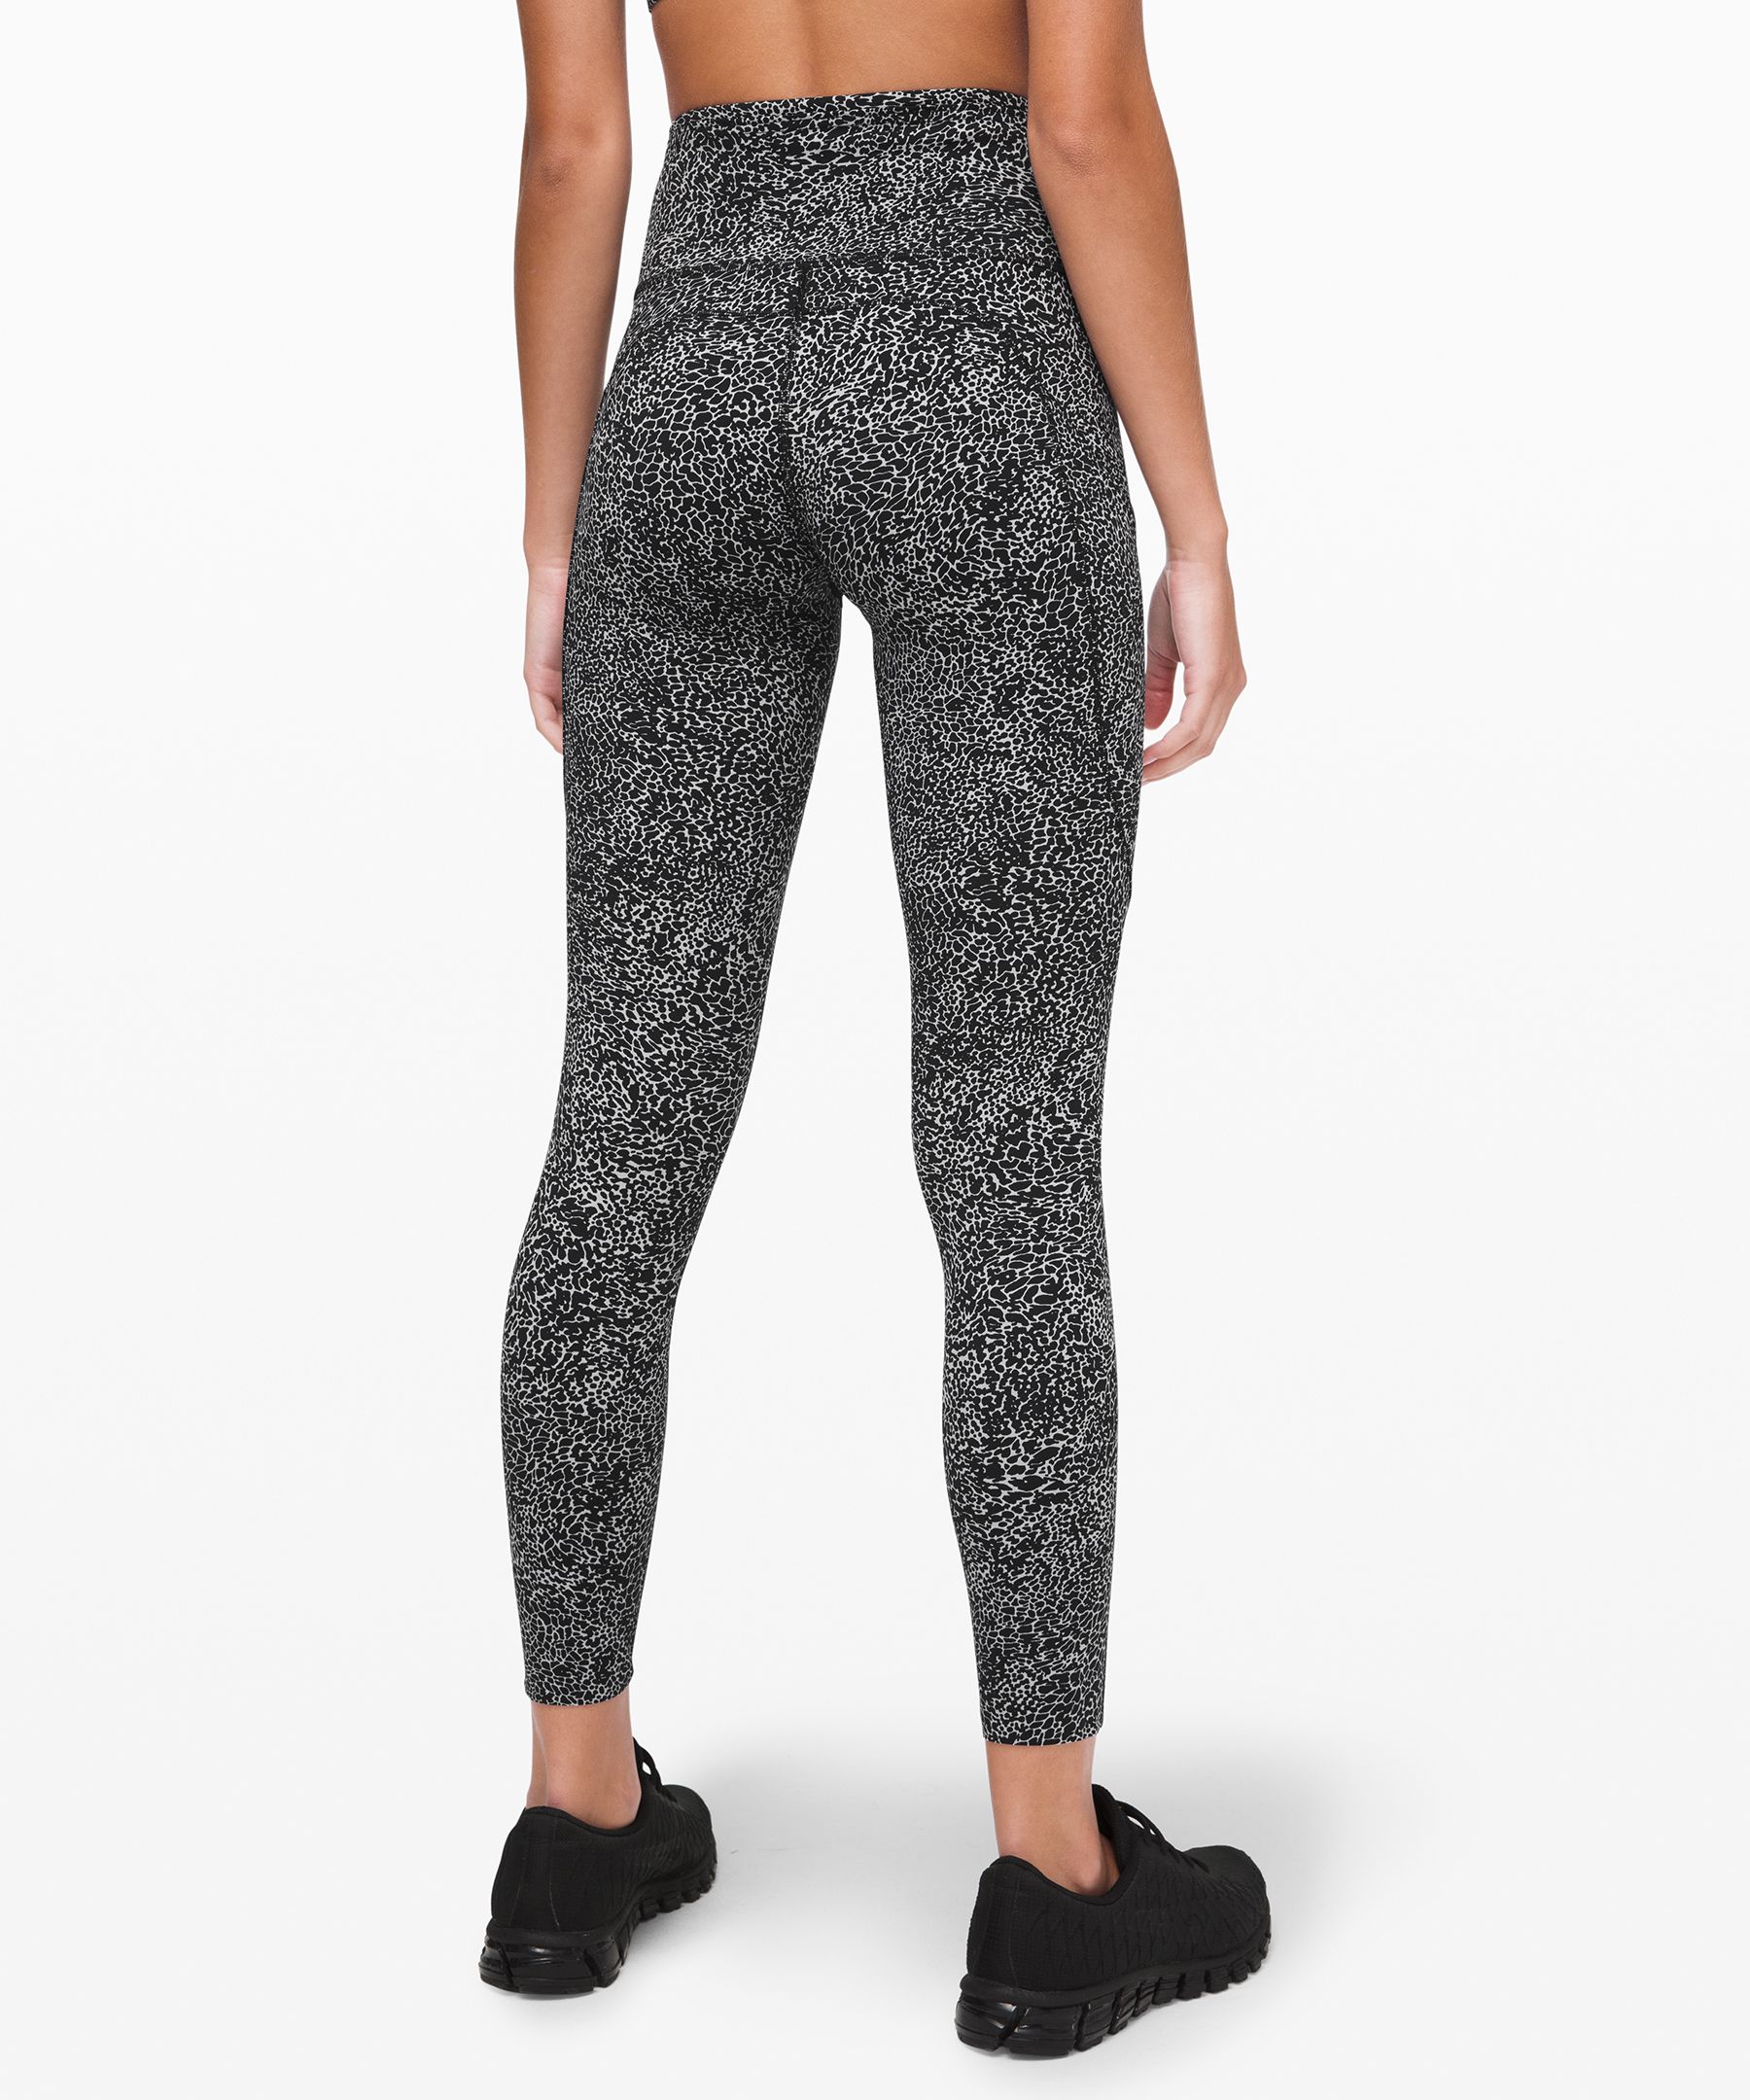 Brand new Lululemon Women's Fast and Free HR Tight 25 Ref Pant